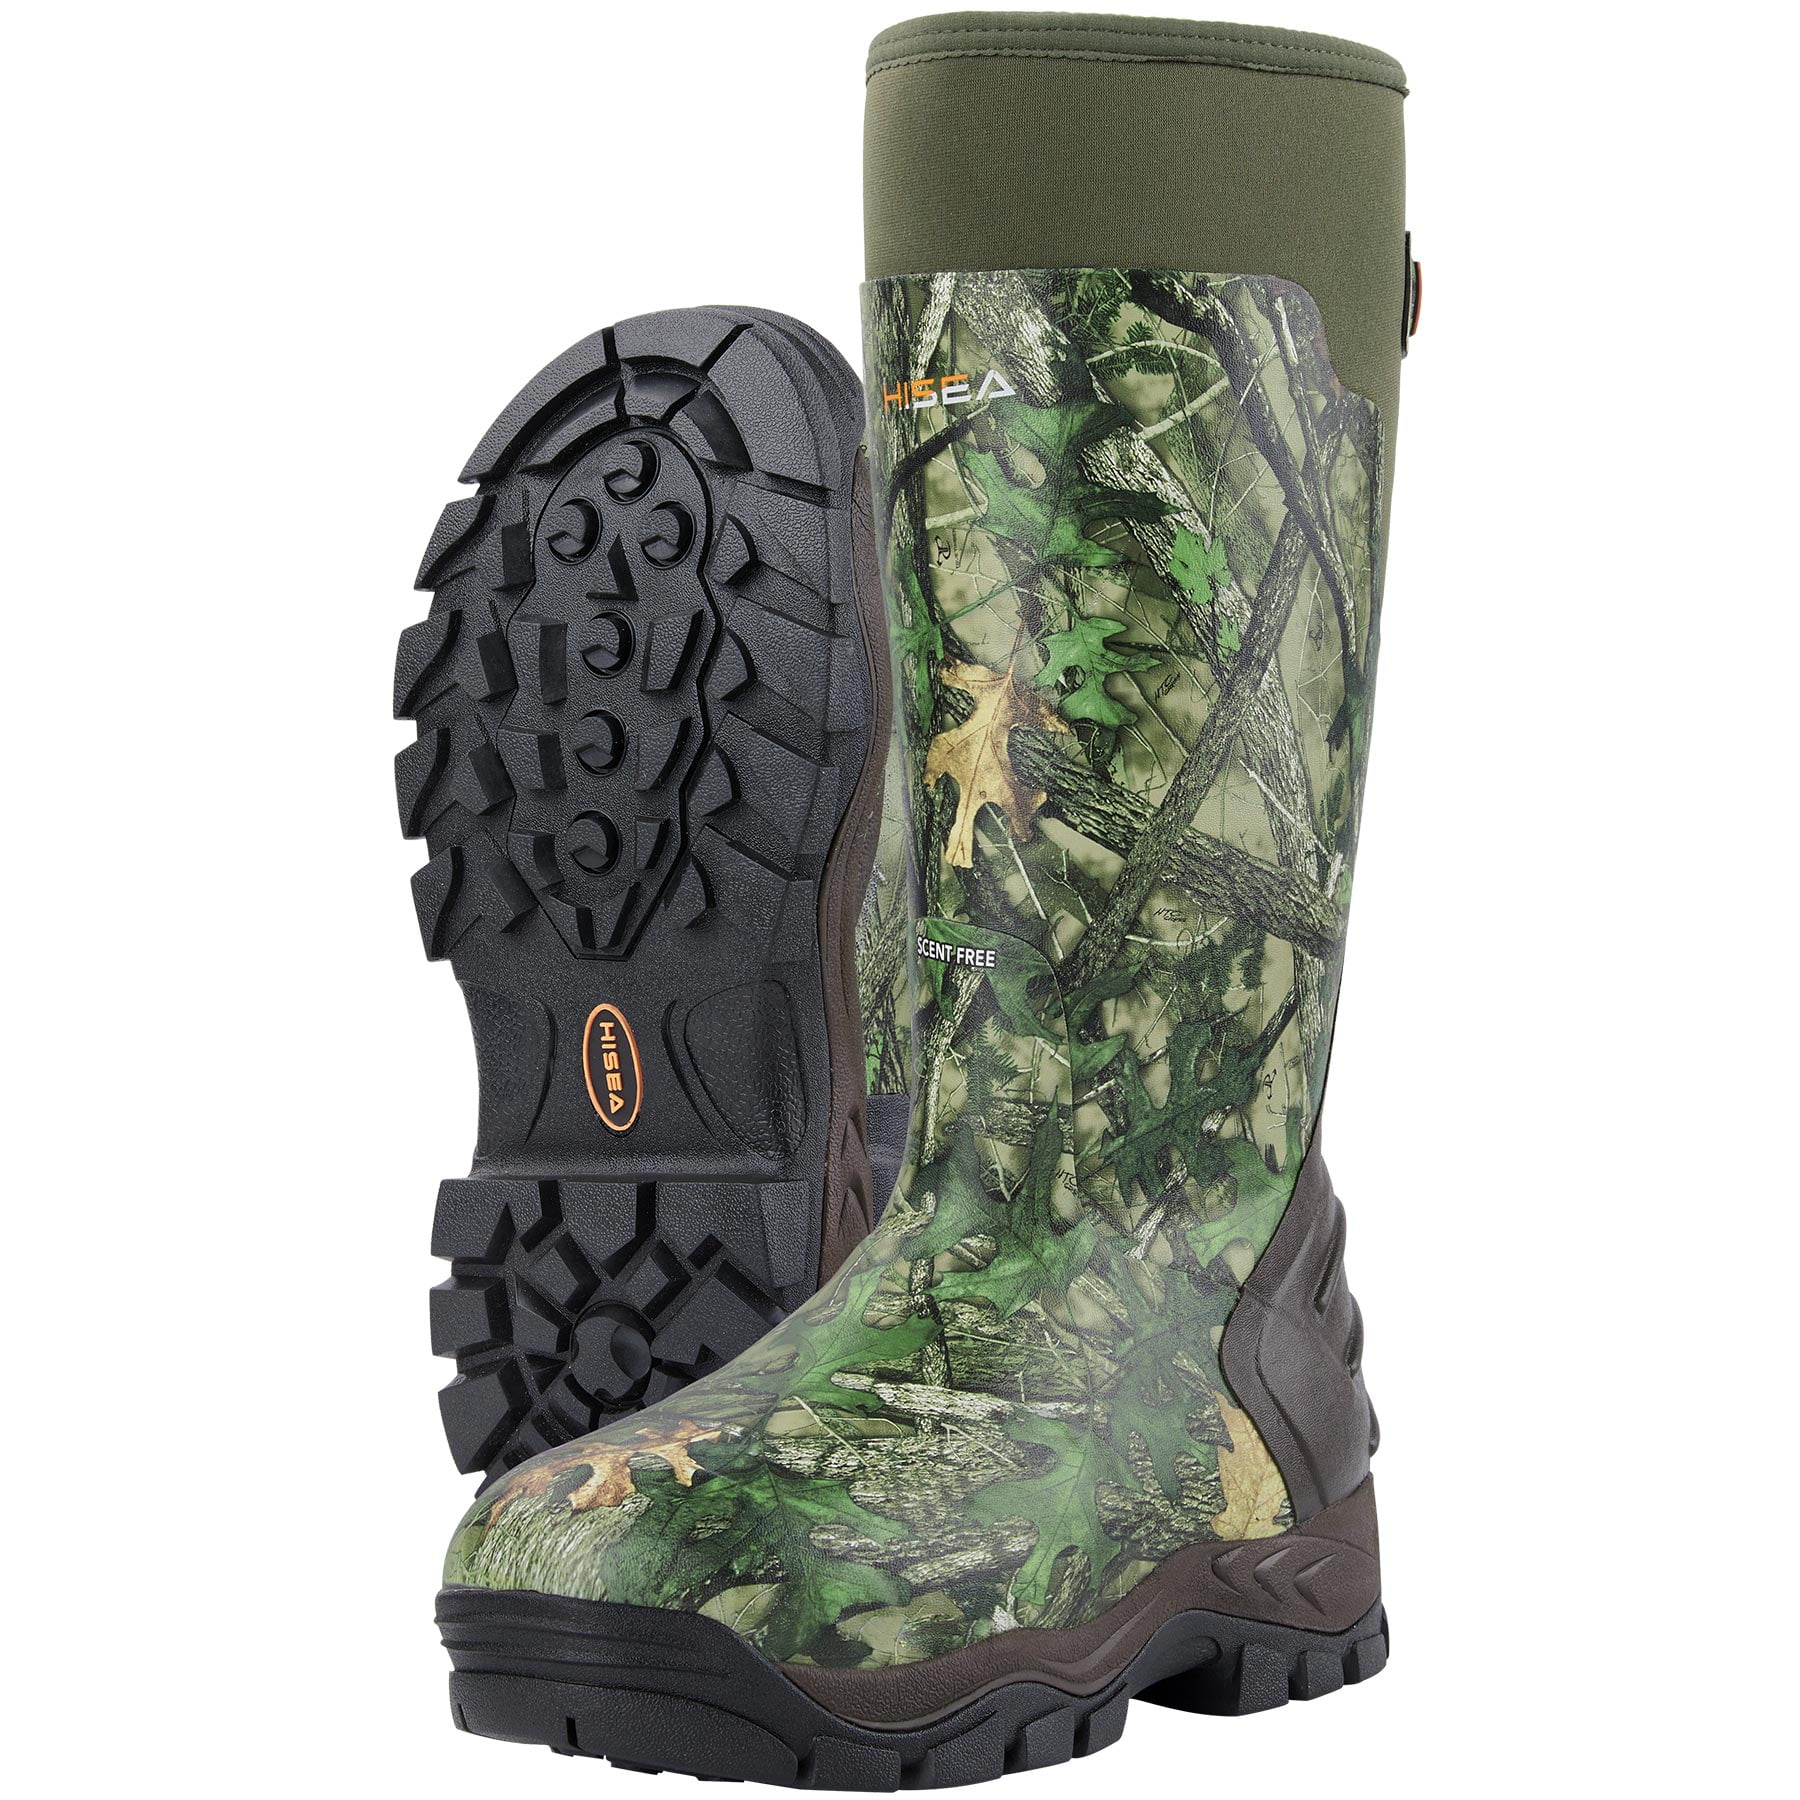 Scent Free Insulated camouflage Wellies muck boots hunting fishing size 11 